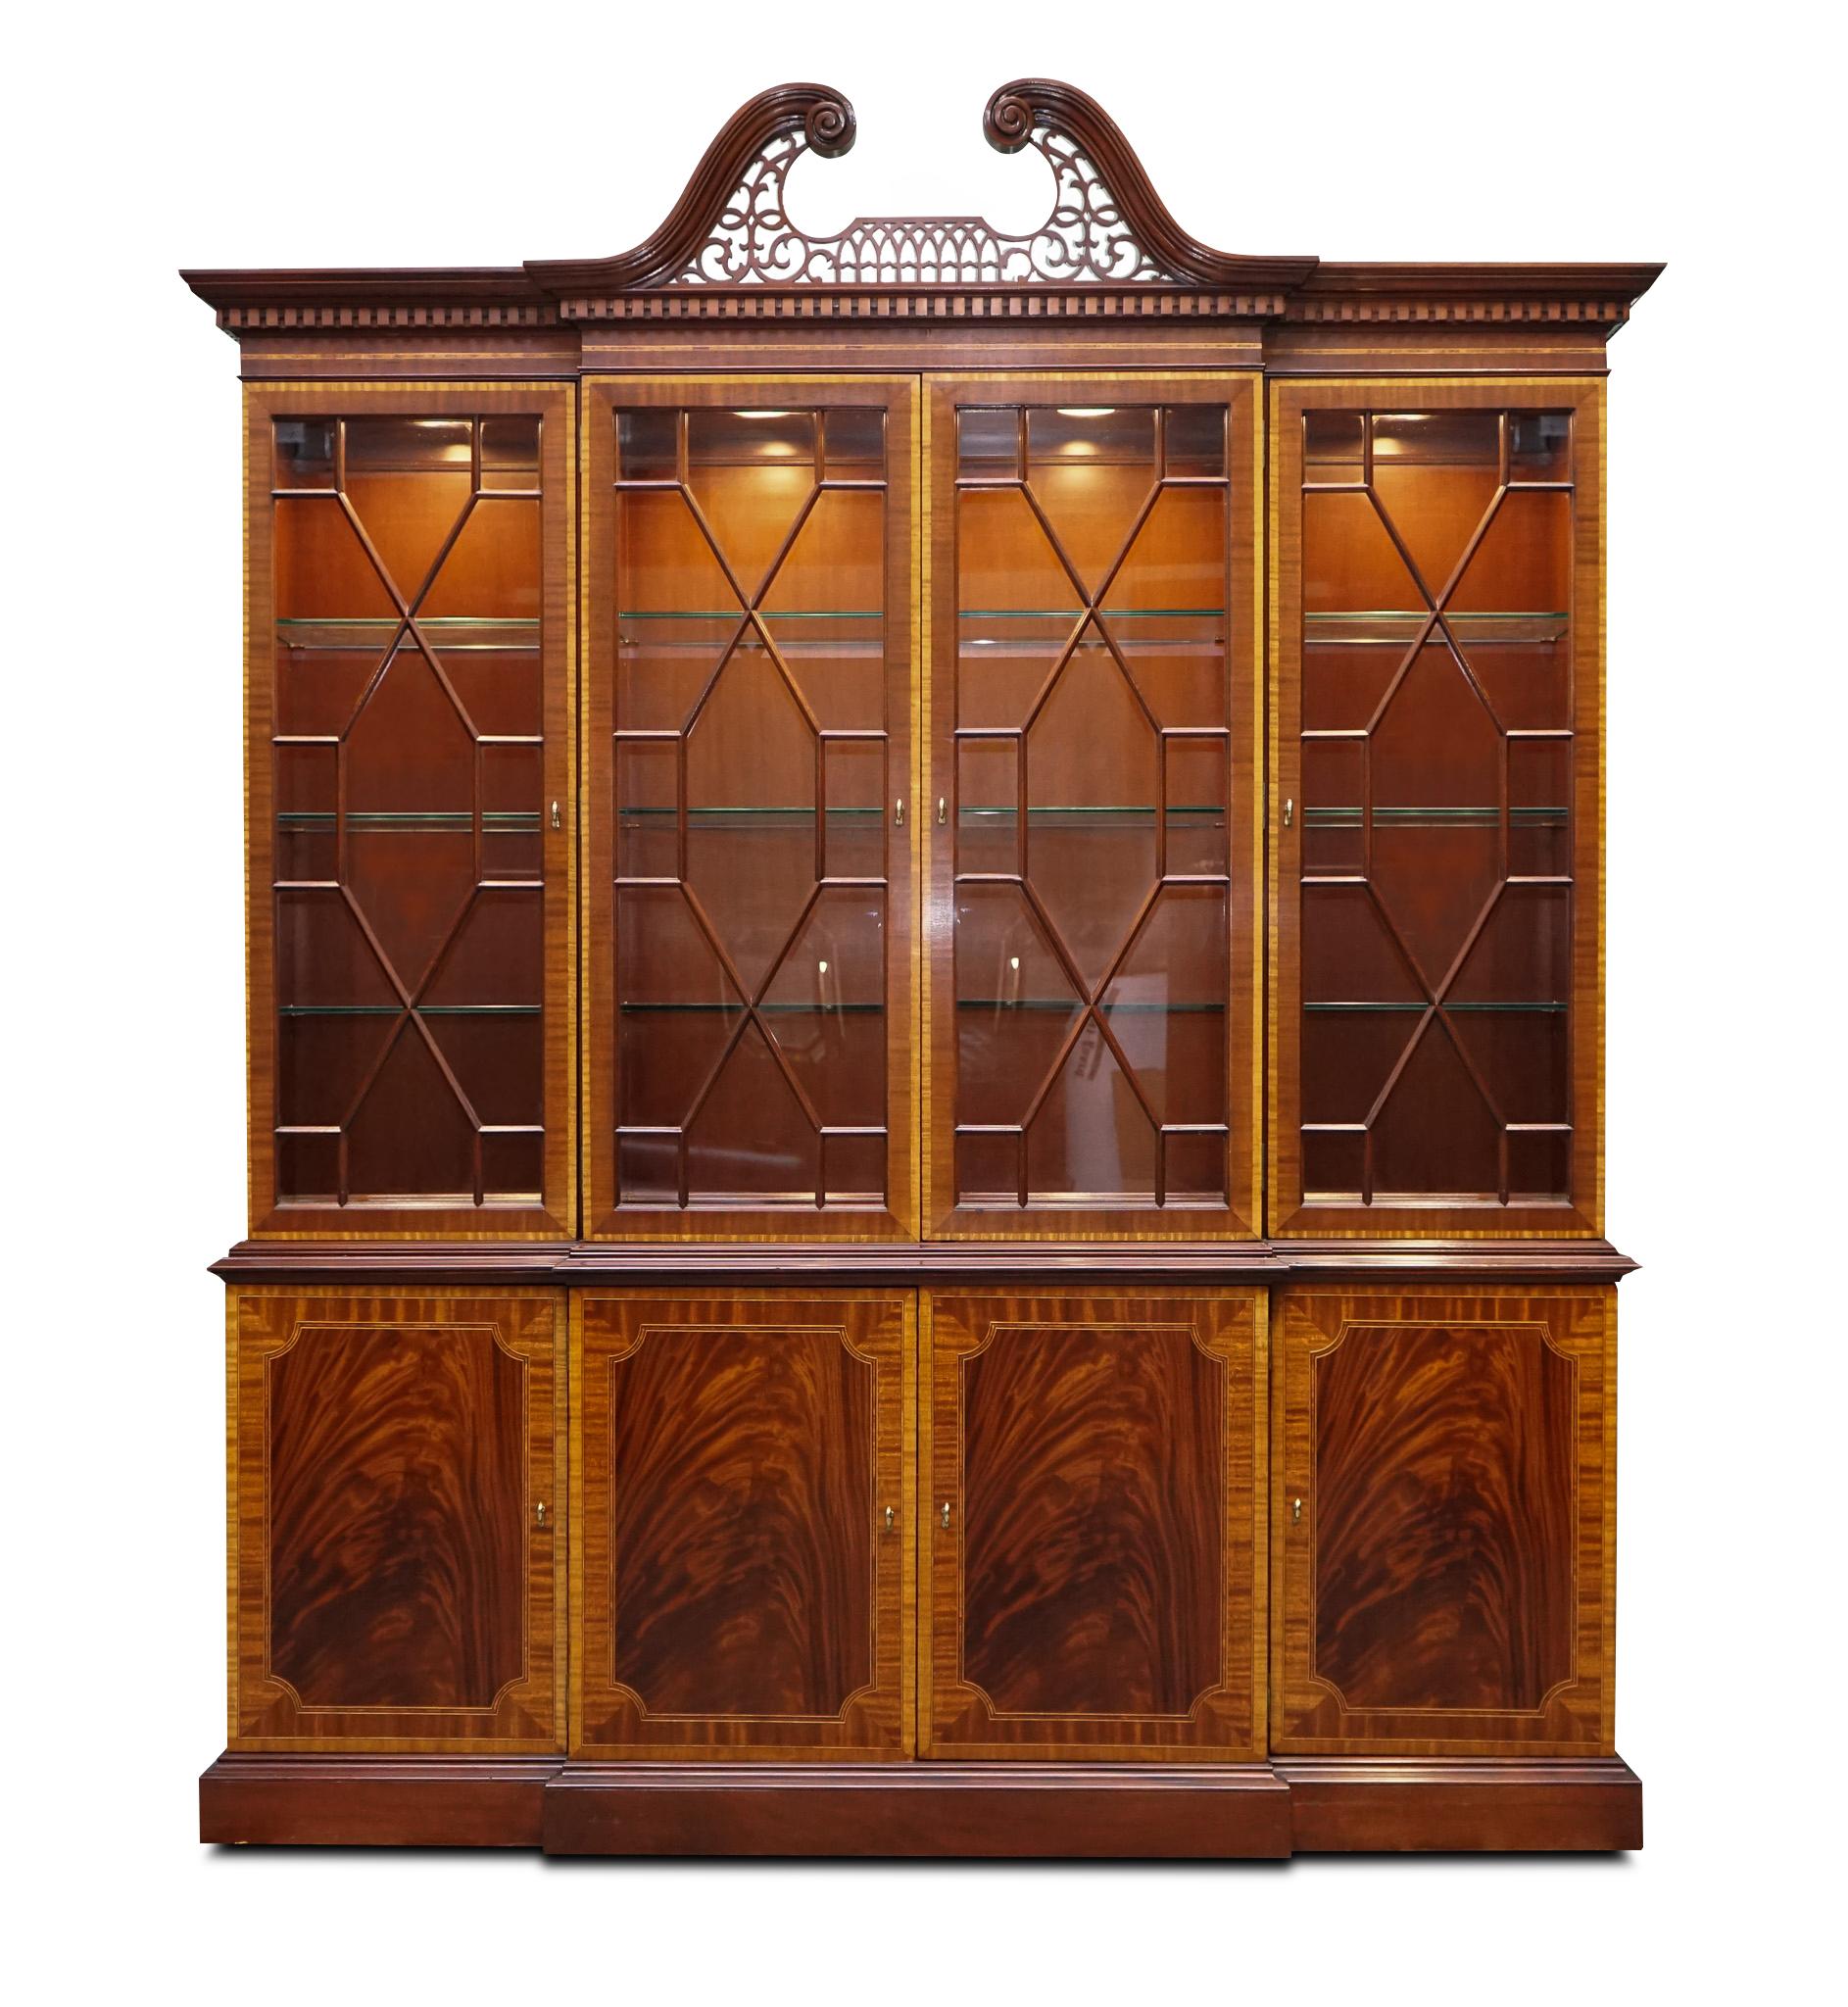 British Large Georgian Style Mahogany Breakfront Bookcase Councill Furniture For Sale